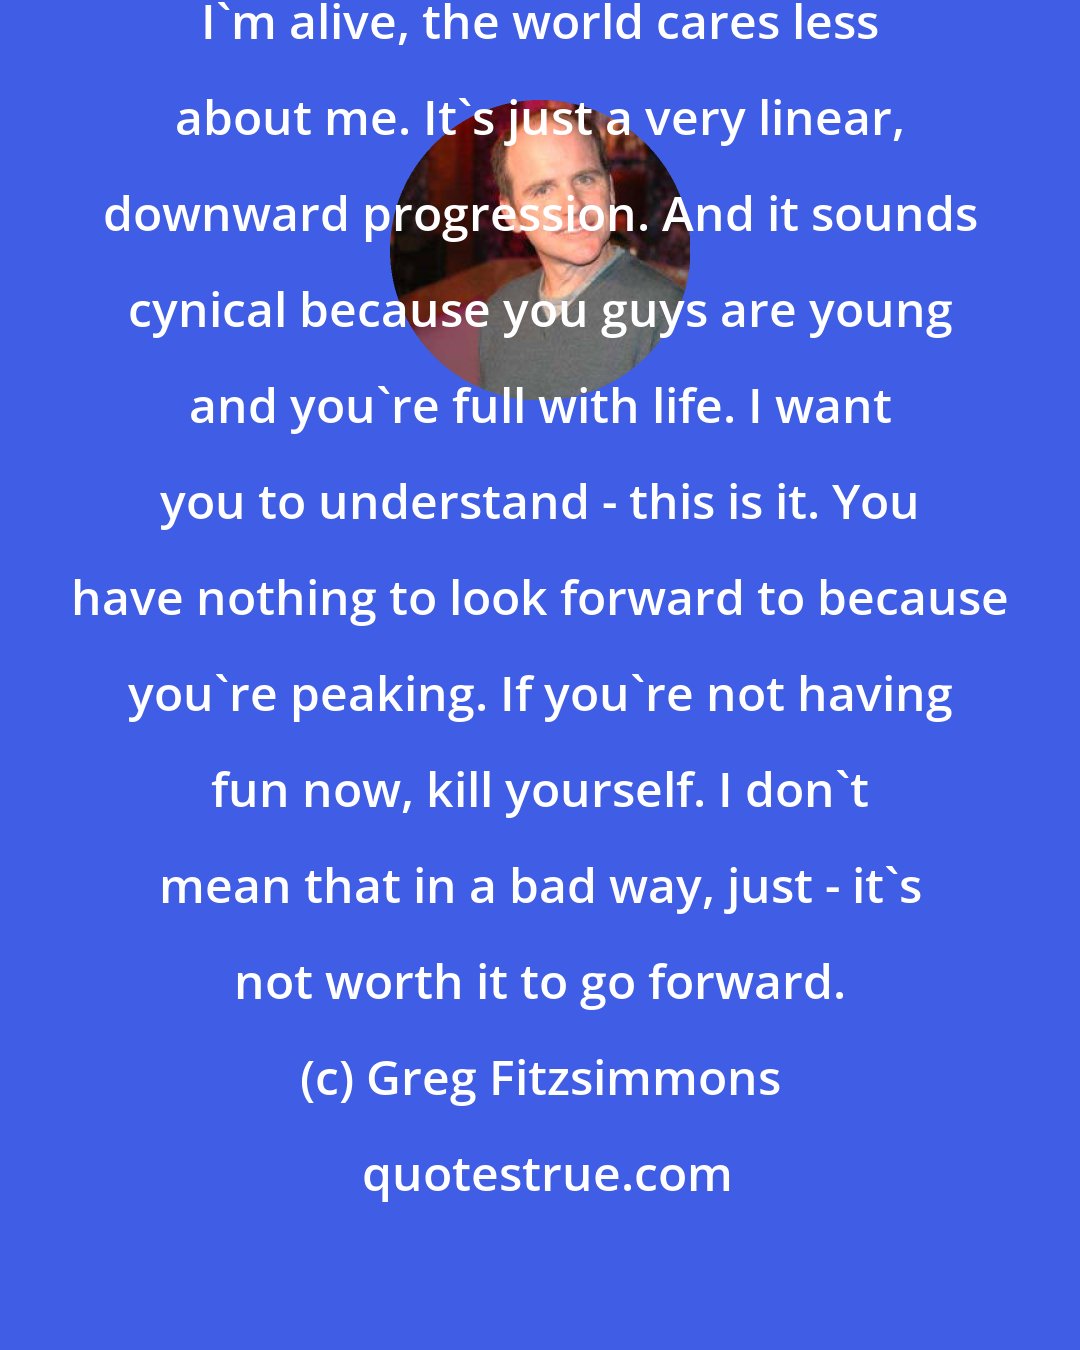 Greg Fitzsimmons: I realized that every second that I'm alive, the world cares less about me. It's just a very linear, downward progression. And it sounds cynical because you guys are young and you're full with life. I want you to understand - this is it. You have nothing to look forward to because you're peaking. If you're not having fun now, kill yourself. I don't mean that in a bad way, just - it's not worth it to go forward.